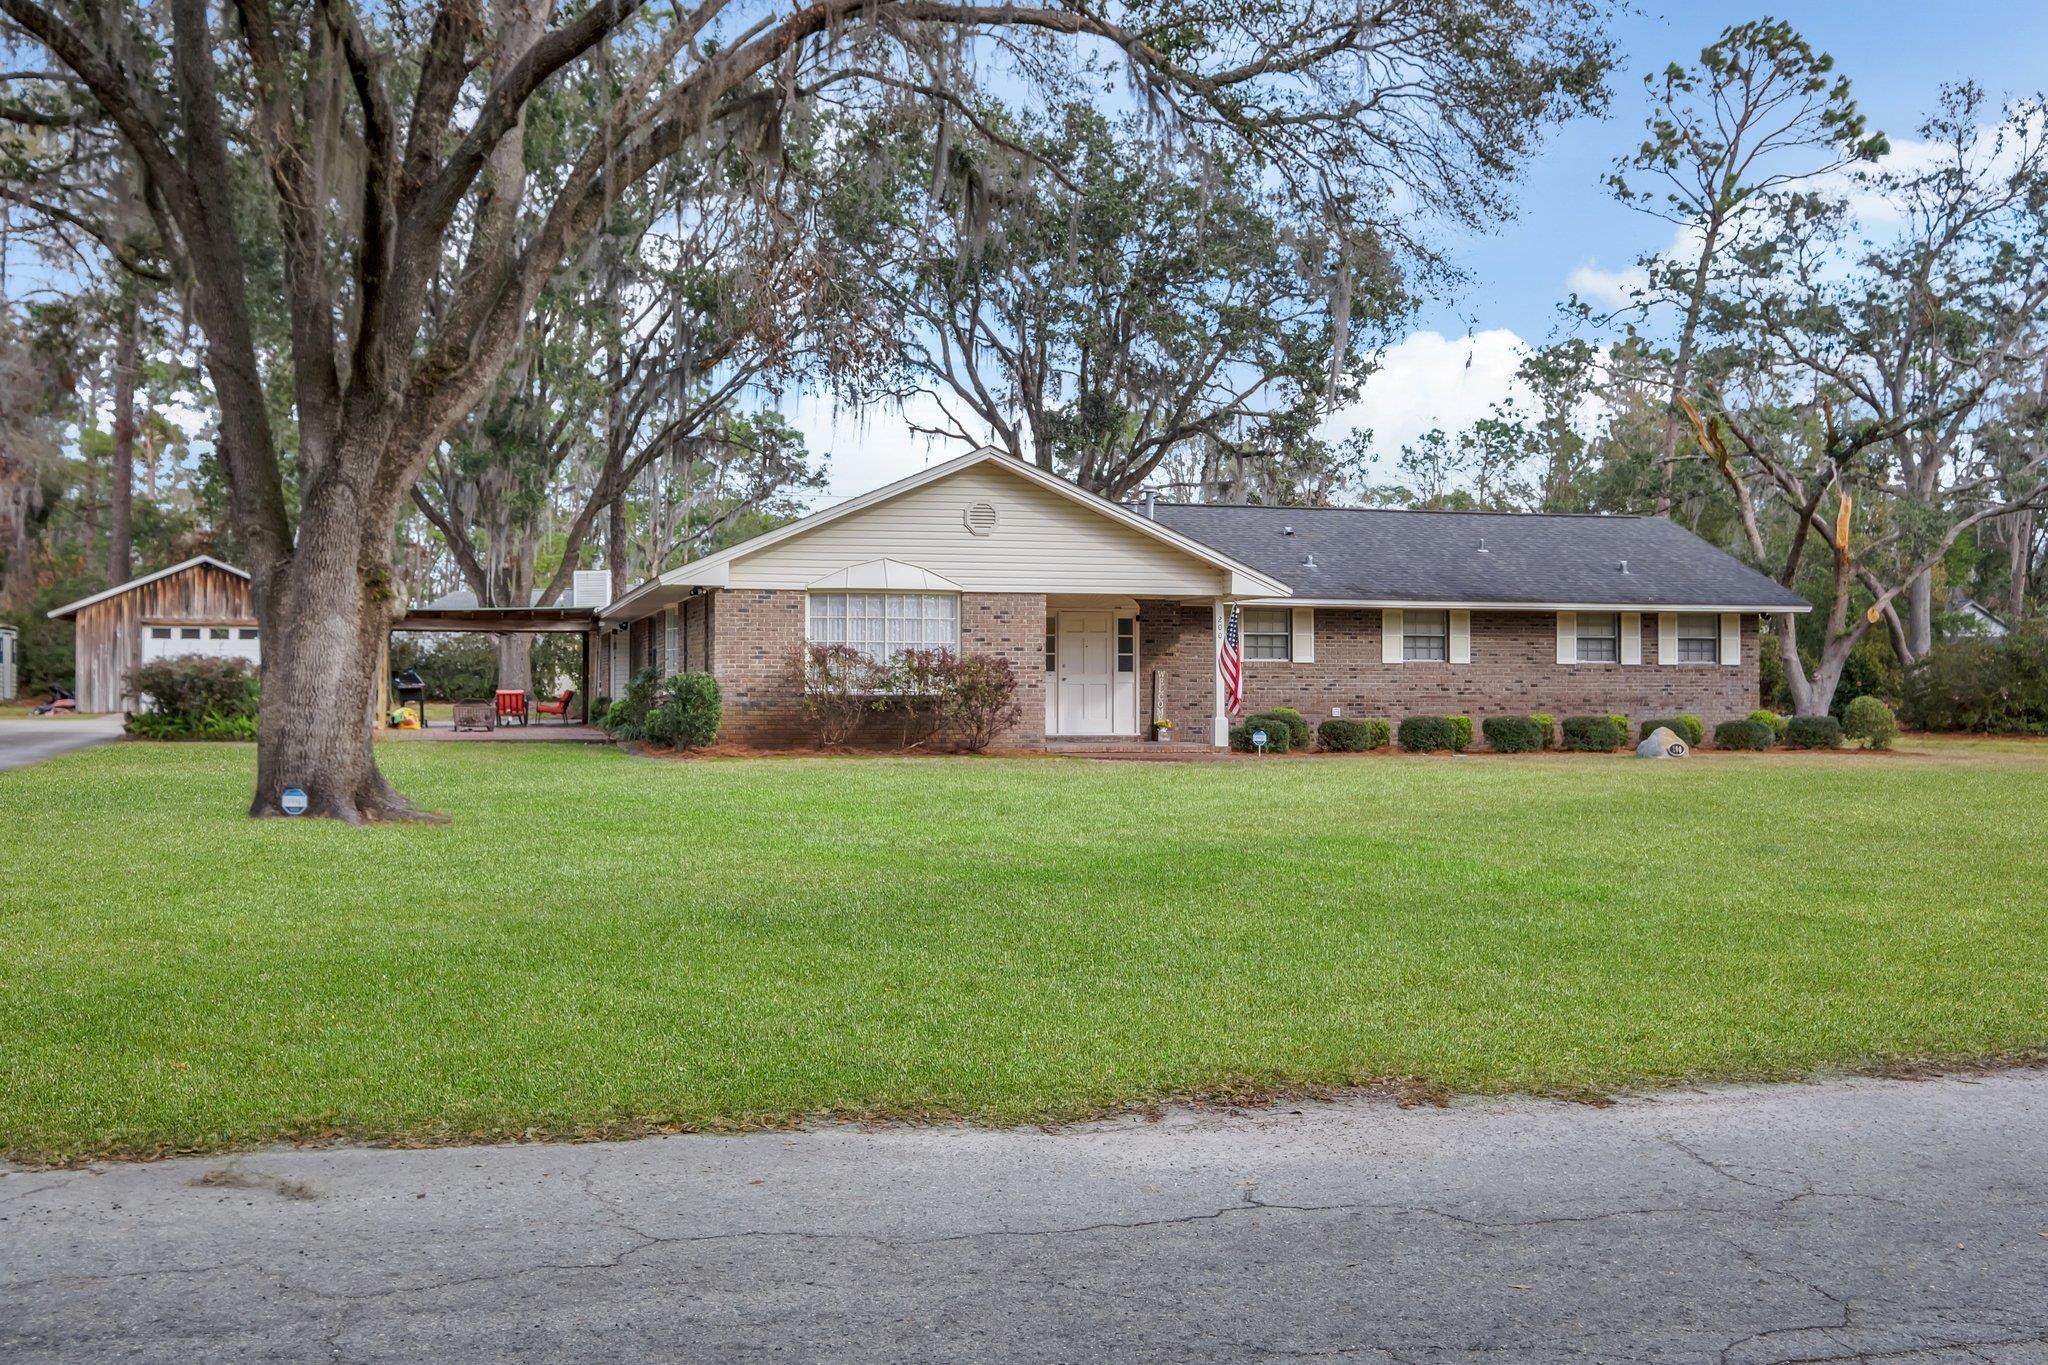 200 State Street,PERRY,Florida 32348,4 Bedrooms Bedrooms,2 BathroomsBathrooms,Detached single family,200 State Street,367088